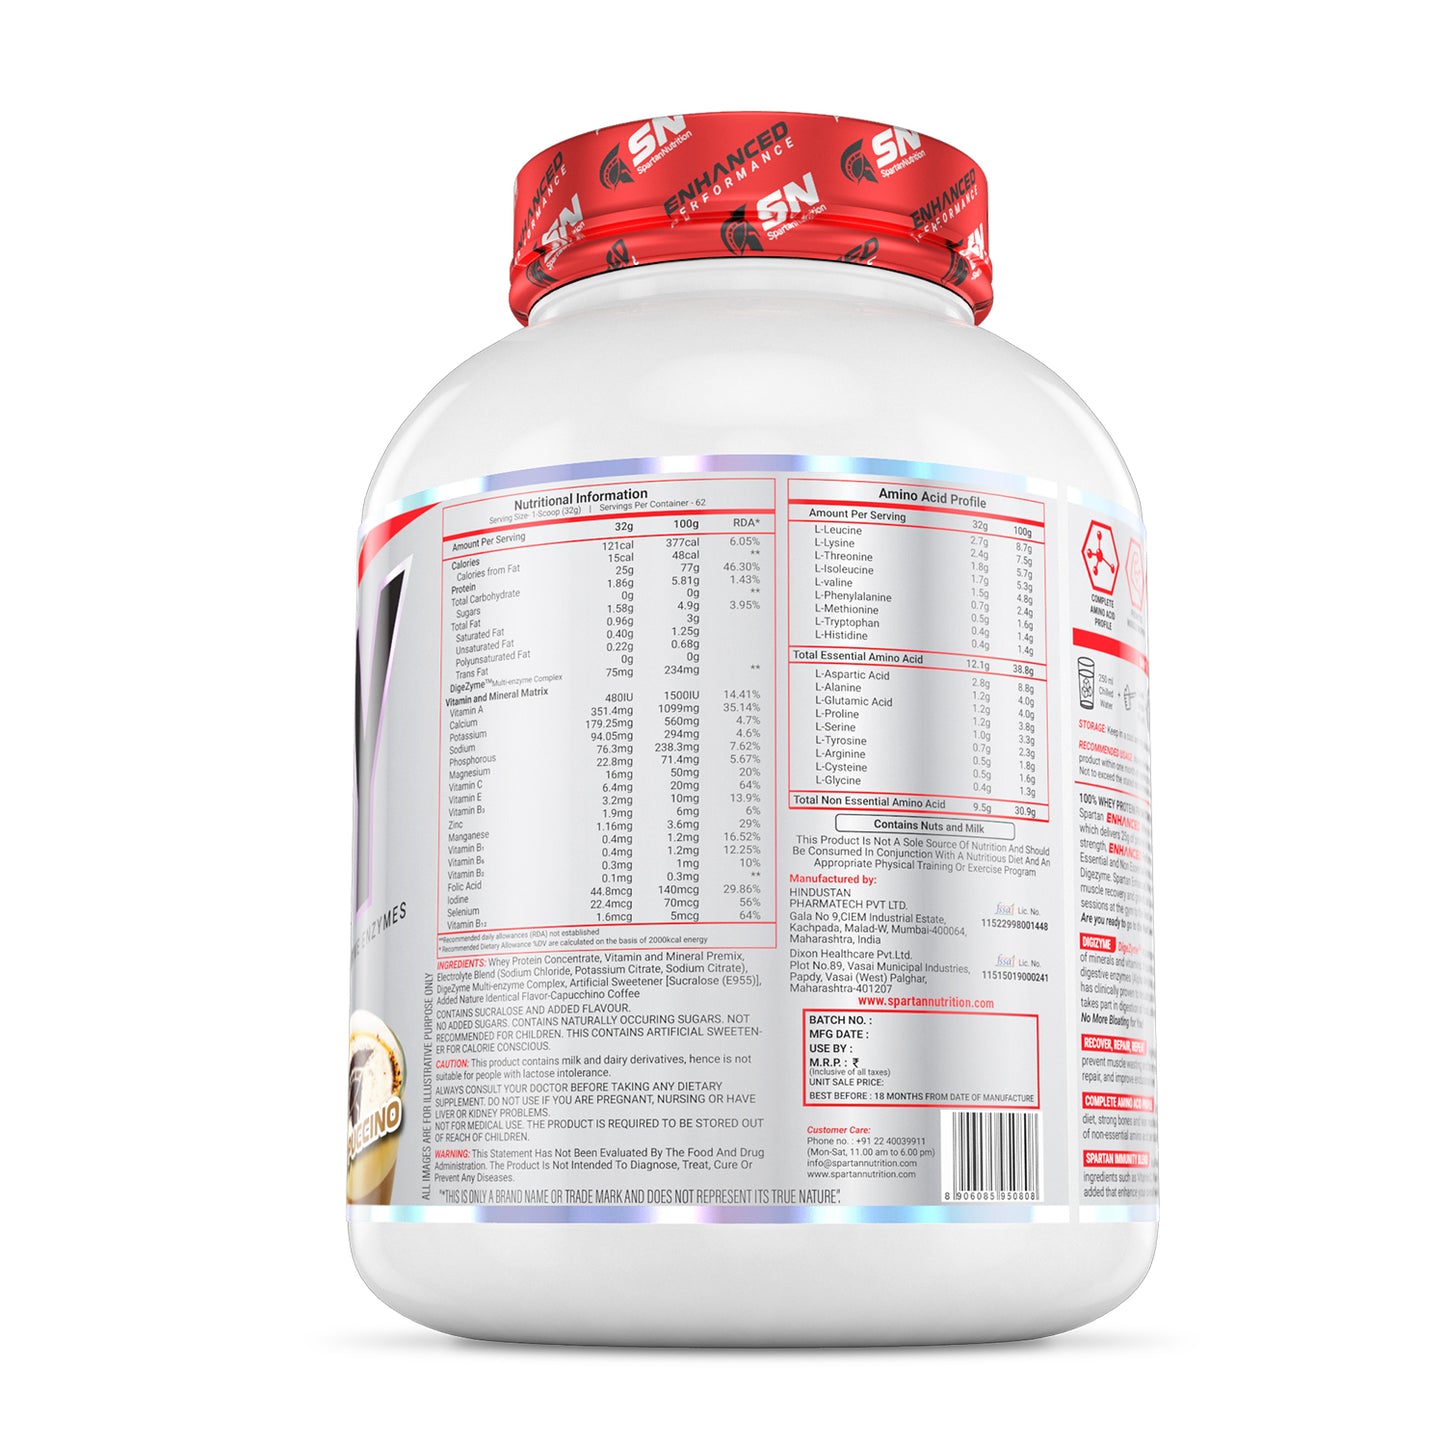 Spartan Nutrition Enhanced Performance Whey Protein – 2 kg, with Complete Amino Acid Profile, Protein - 25 g, Low Calories- 121 Kcal, Digezyme – 75mg Per Serving and Zero Added Sugar